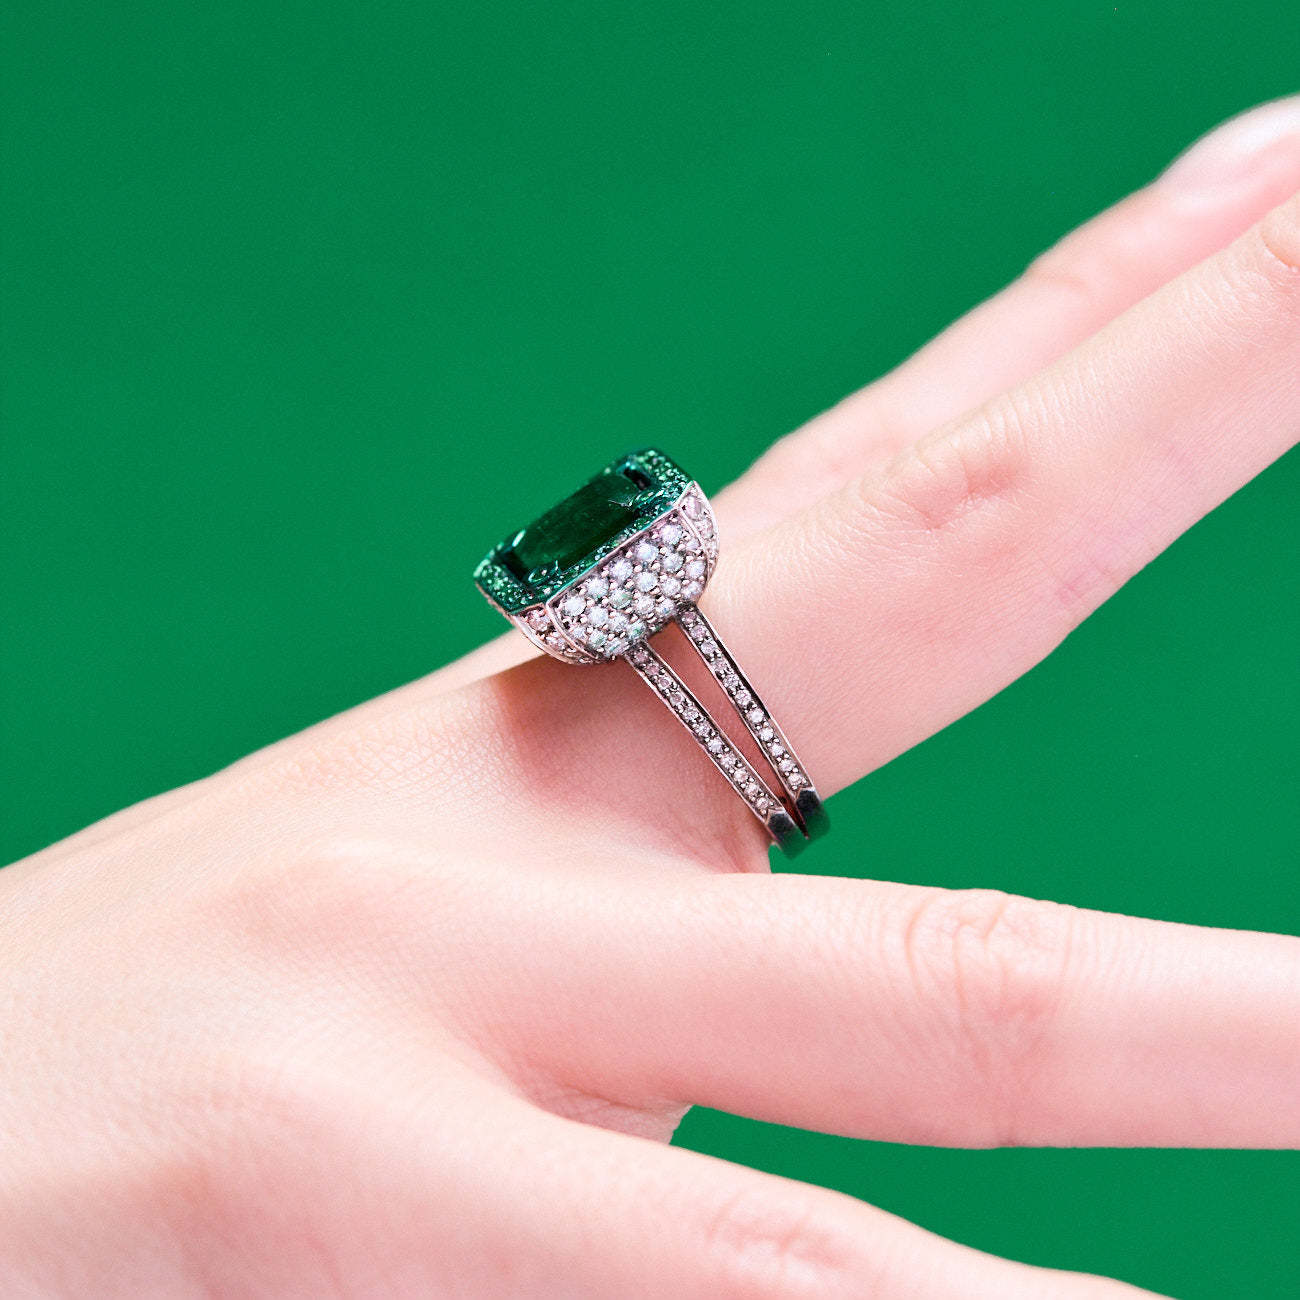 Emerald Cup Ring with with Emeralds in blackened 18 karat white goldby Solange Azagury-Partridge On Hand